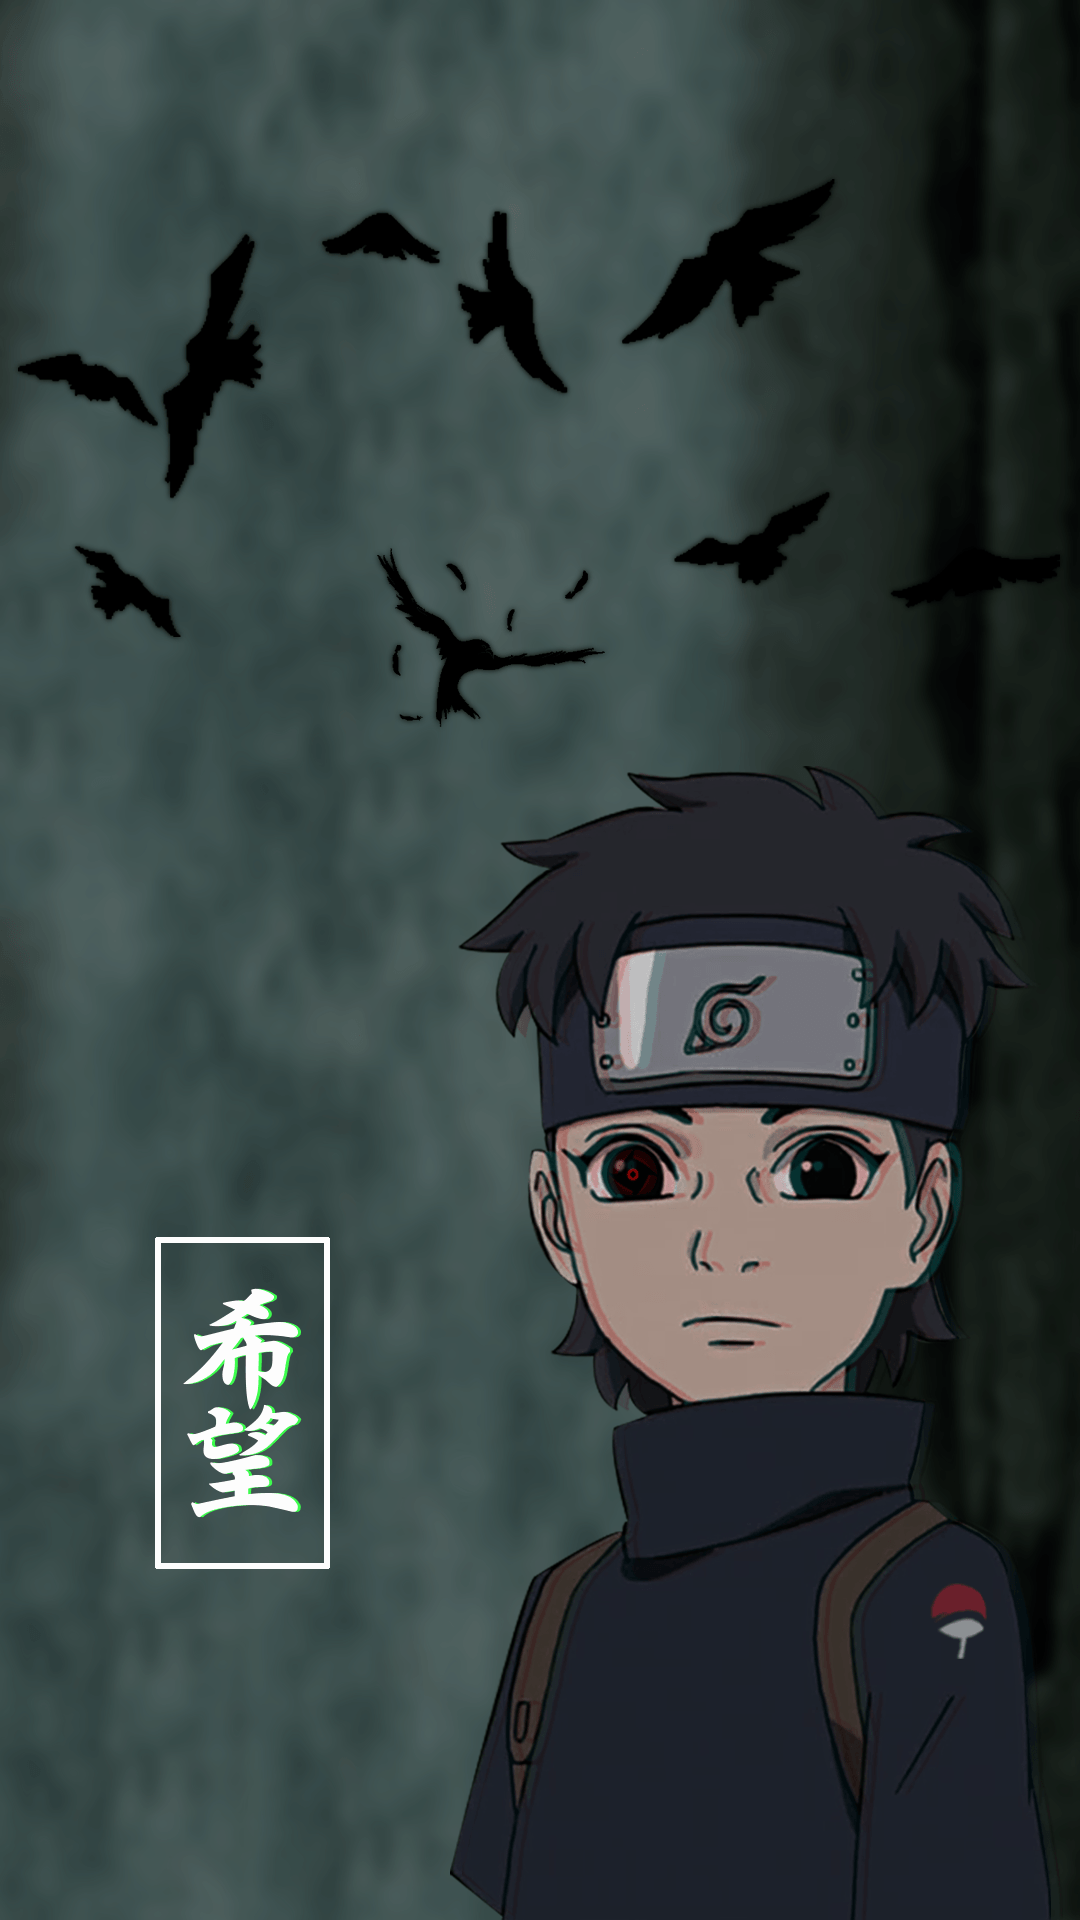 Took a while but here's a Shisui wallpaper